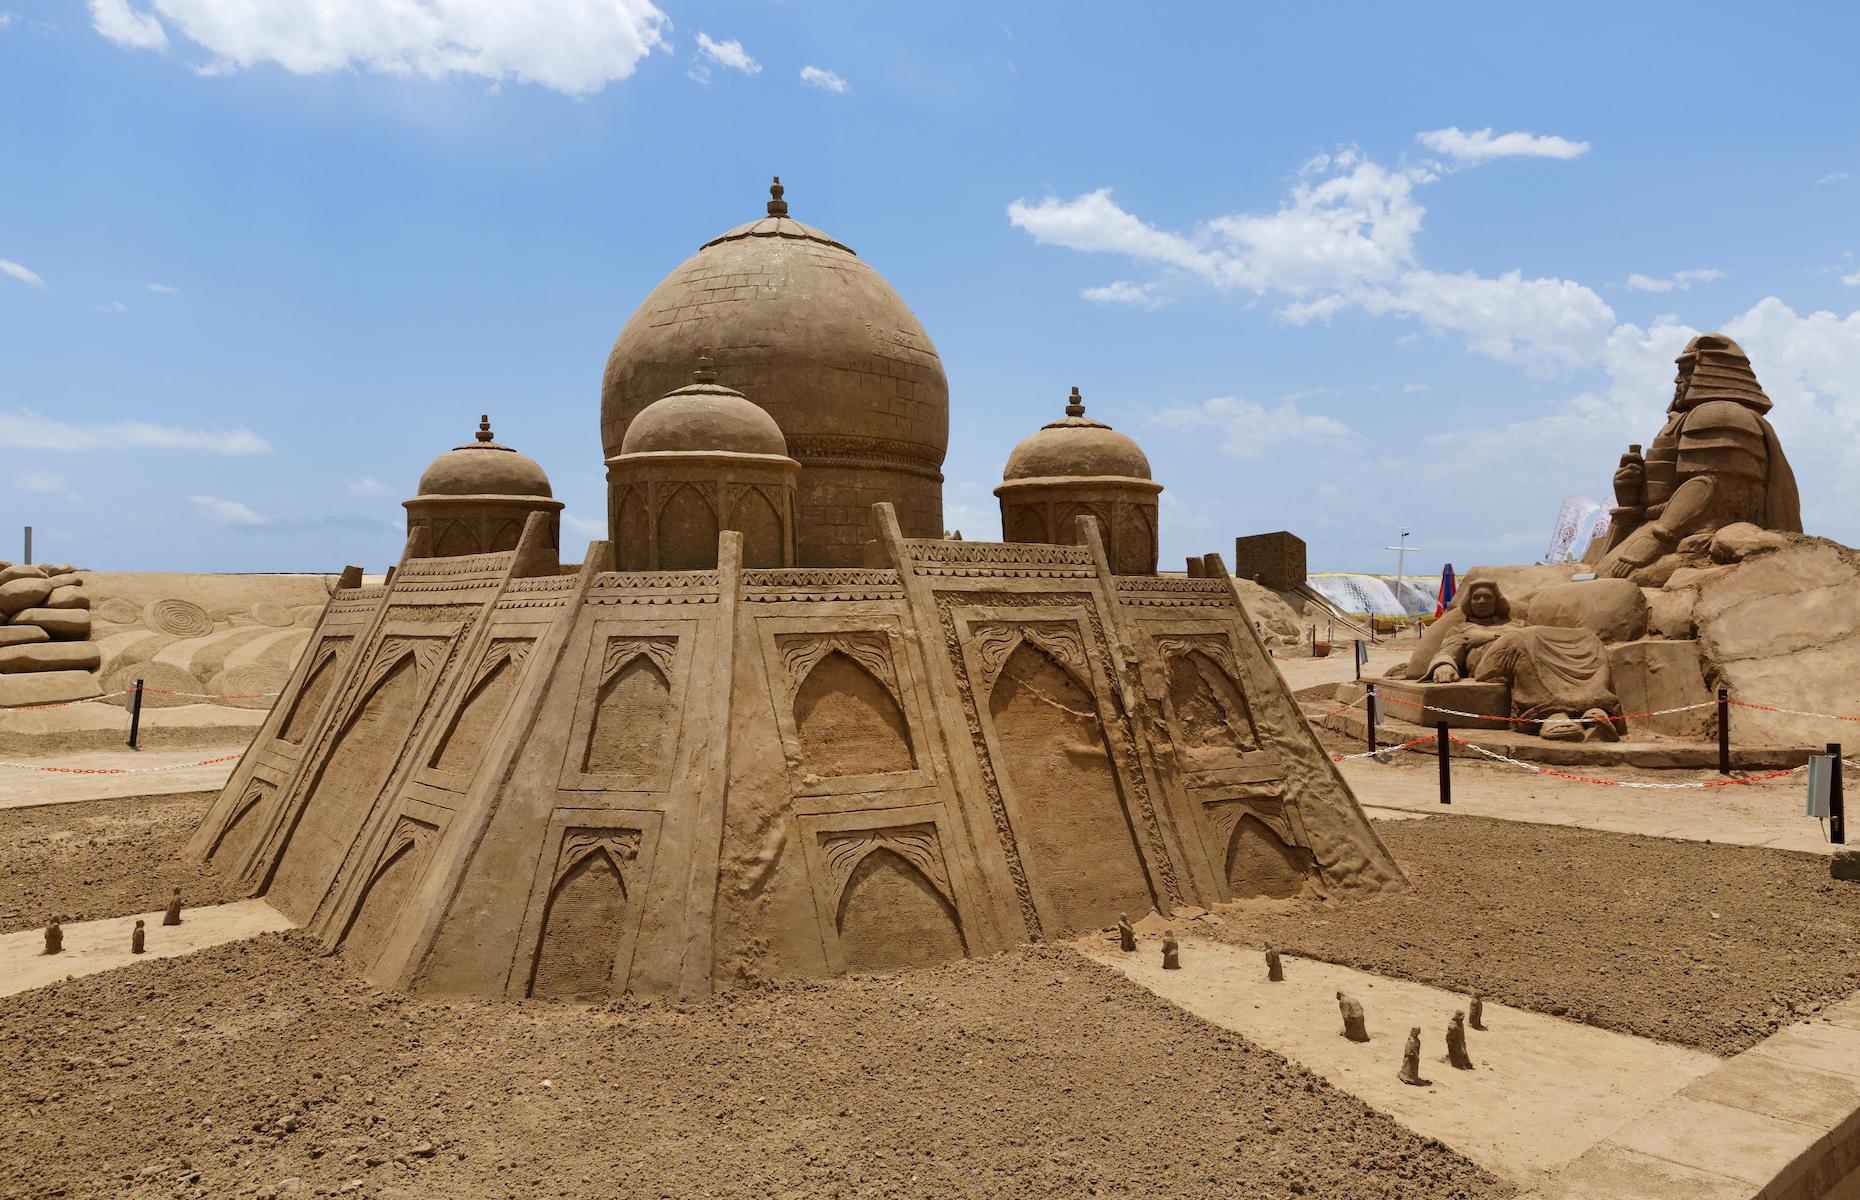 <p>Mythical creatures, fearsome rulers and ancient architecture are just some of the amazing structures that have been on show at the Sand Sculpture Festival, which is usually held annually on Lara Beach in Antalya, Turkey. Pictured here is a model inspired by the Mughal Empire, created by sand artist Jan Zelinka in 2013.</p>  <p><strong><a href="https://www.loveexploring.com/galleries/112118/abandoned-palaces-rebuilt-before-your-eyes?page=1">Abandoned palaces rebuilt before your eyes</a></strong></p>